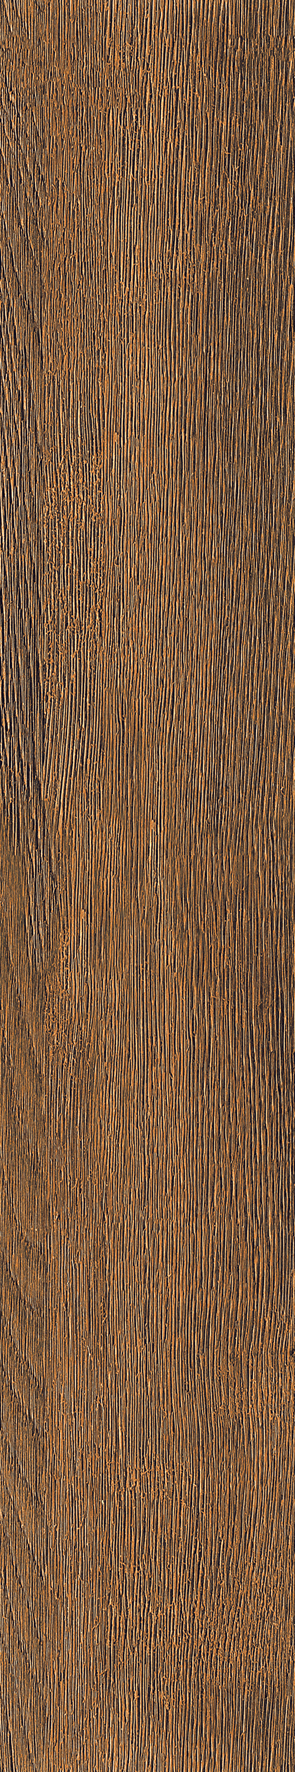 Wooden Plank Tiles for Accent Tiles